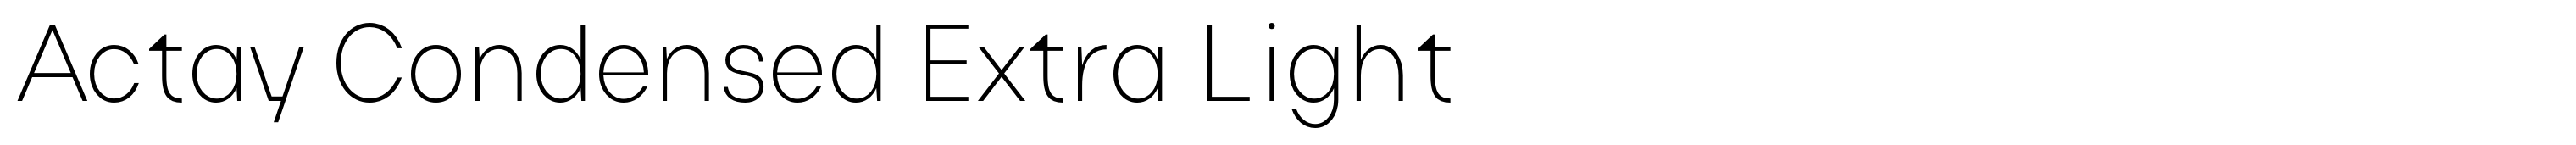 Actay Condensed Extra Light